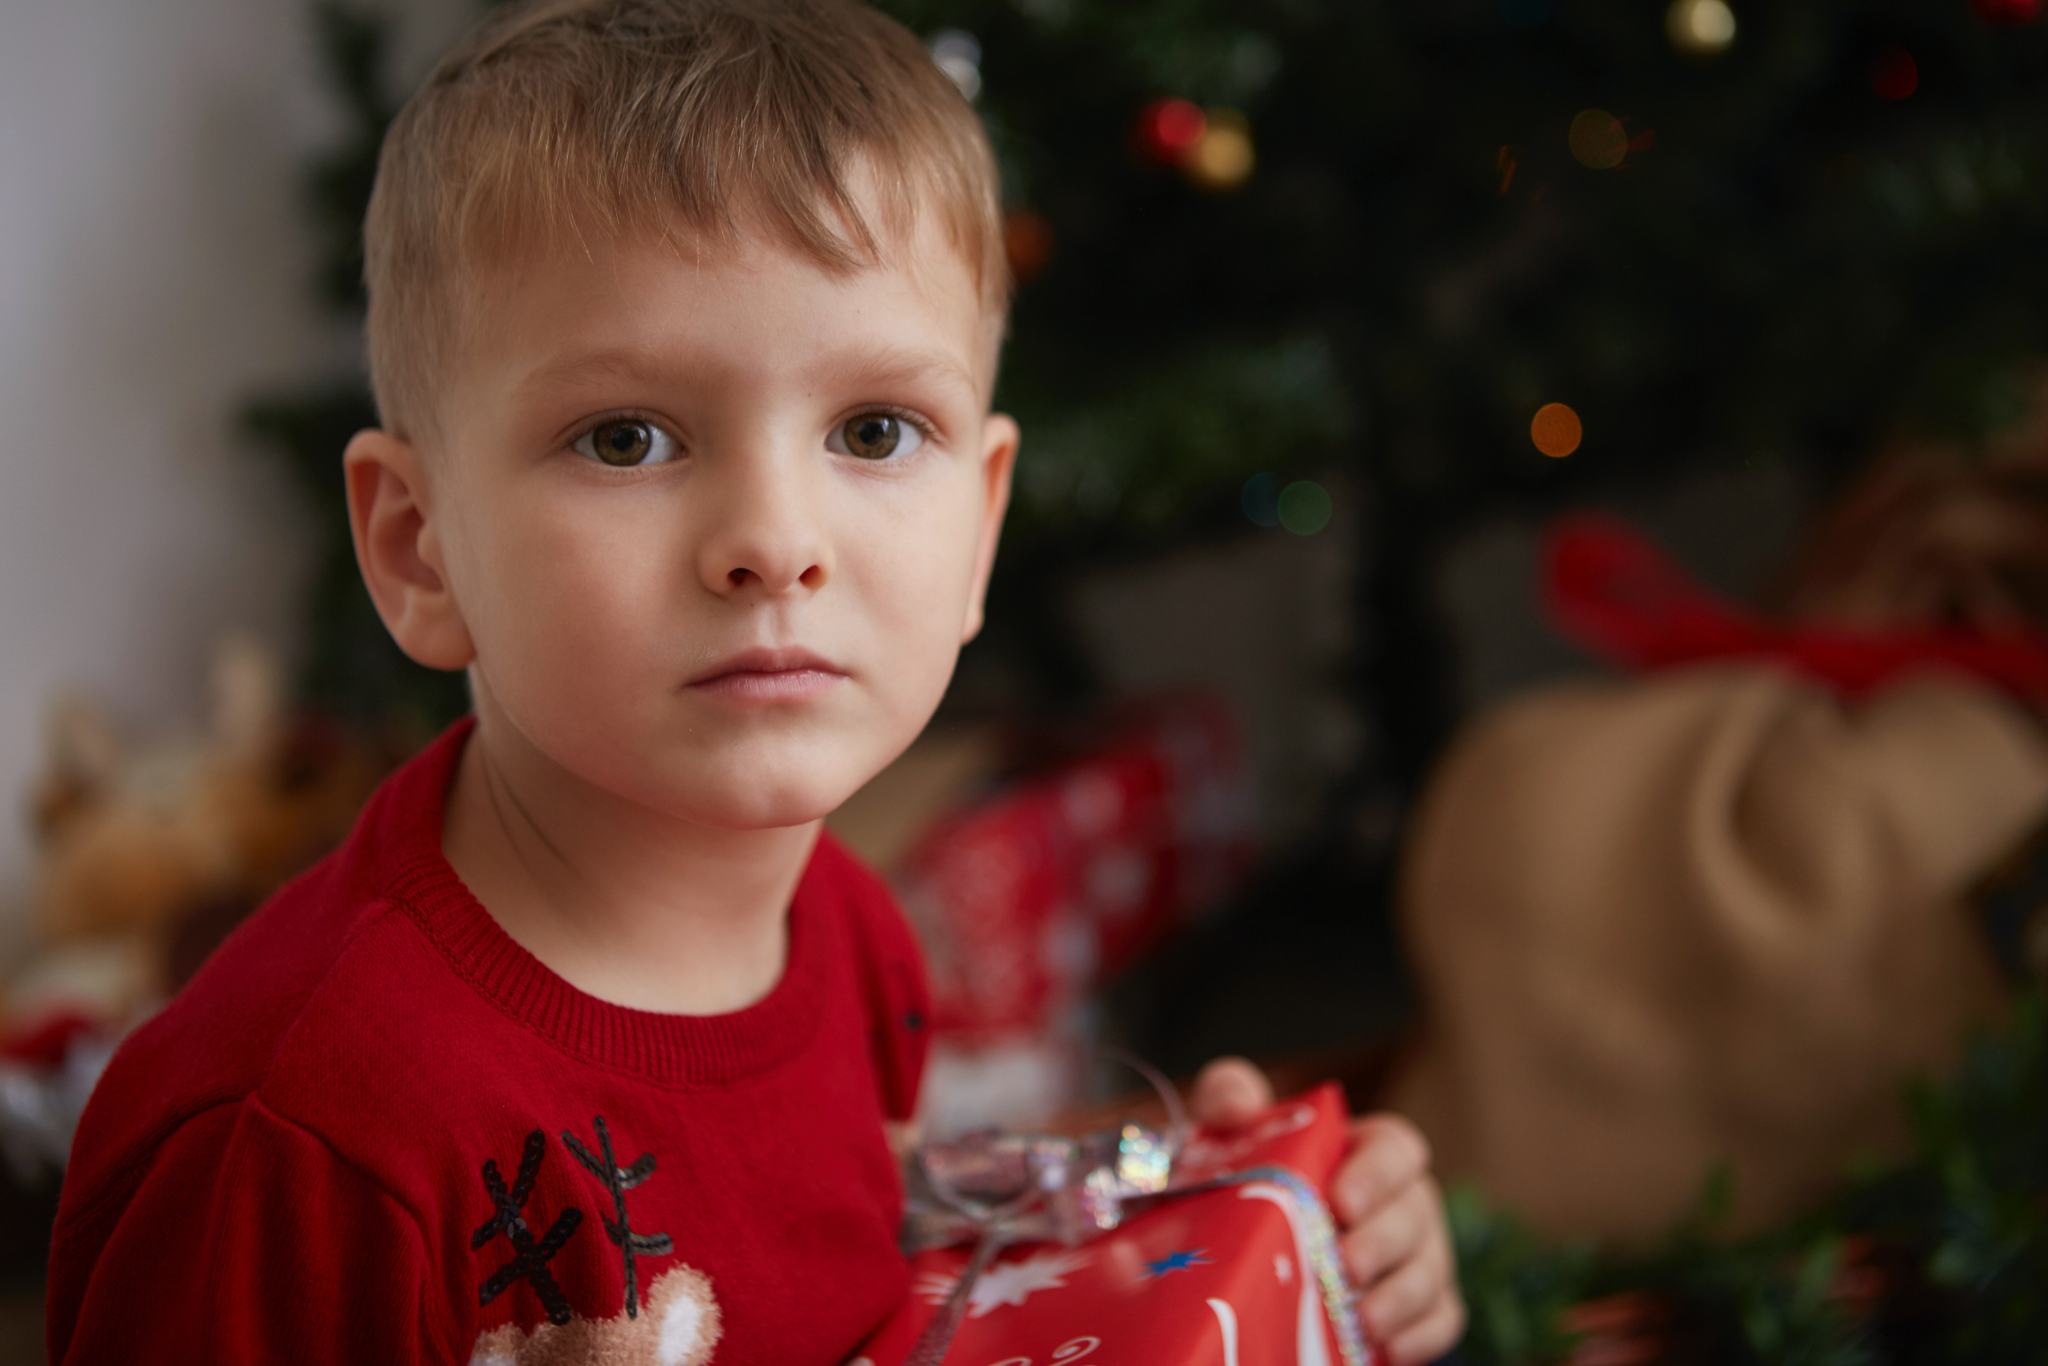 Child next to Christmas tree holding a present